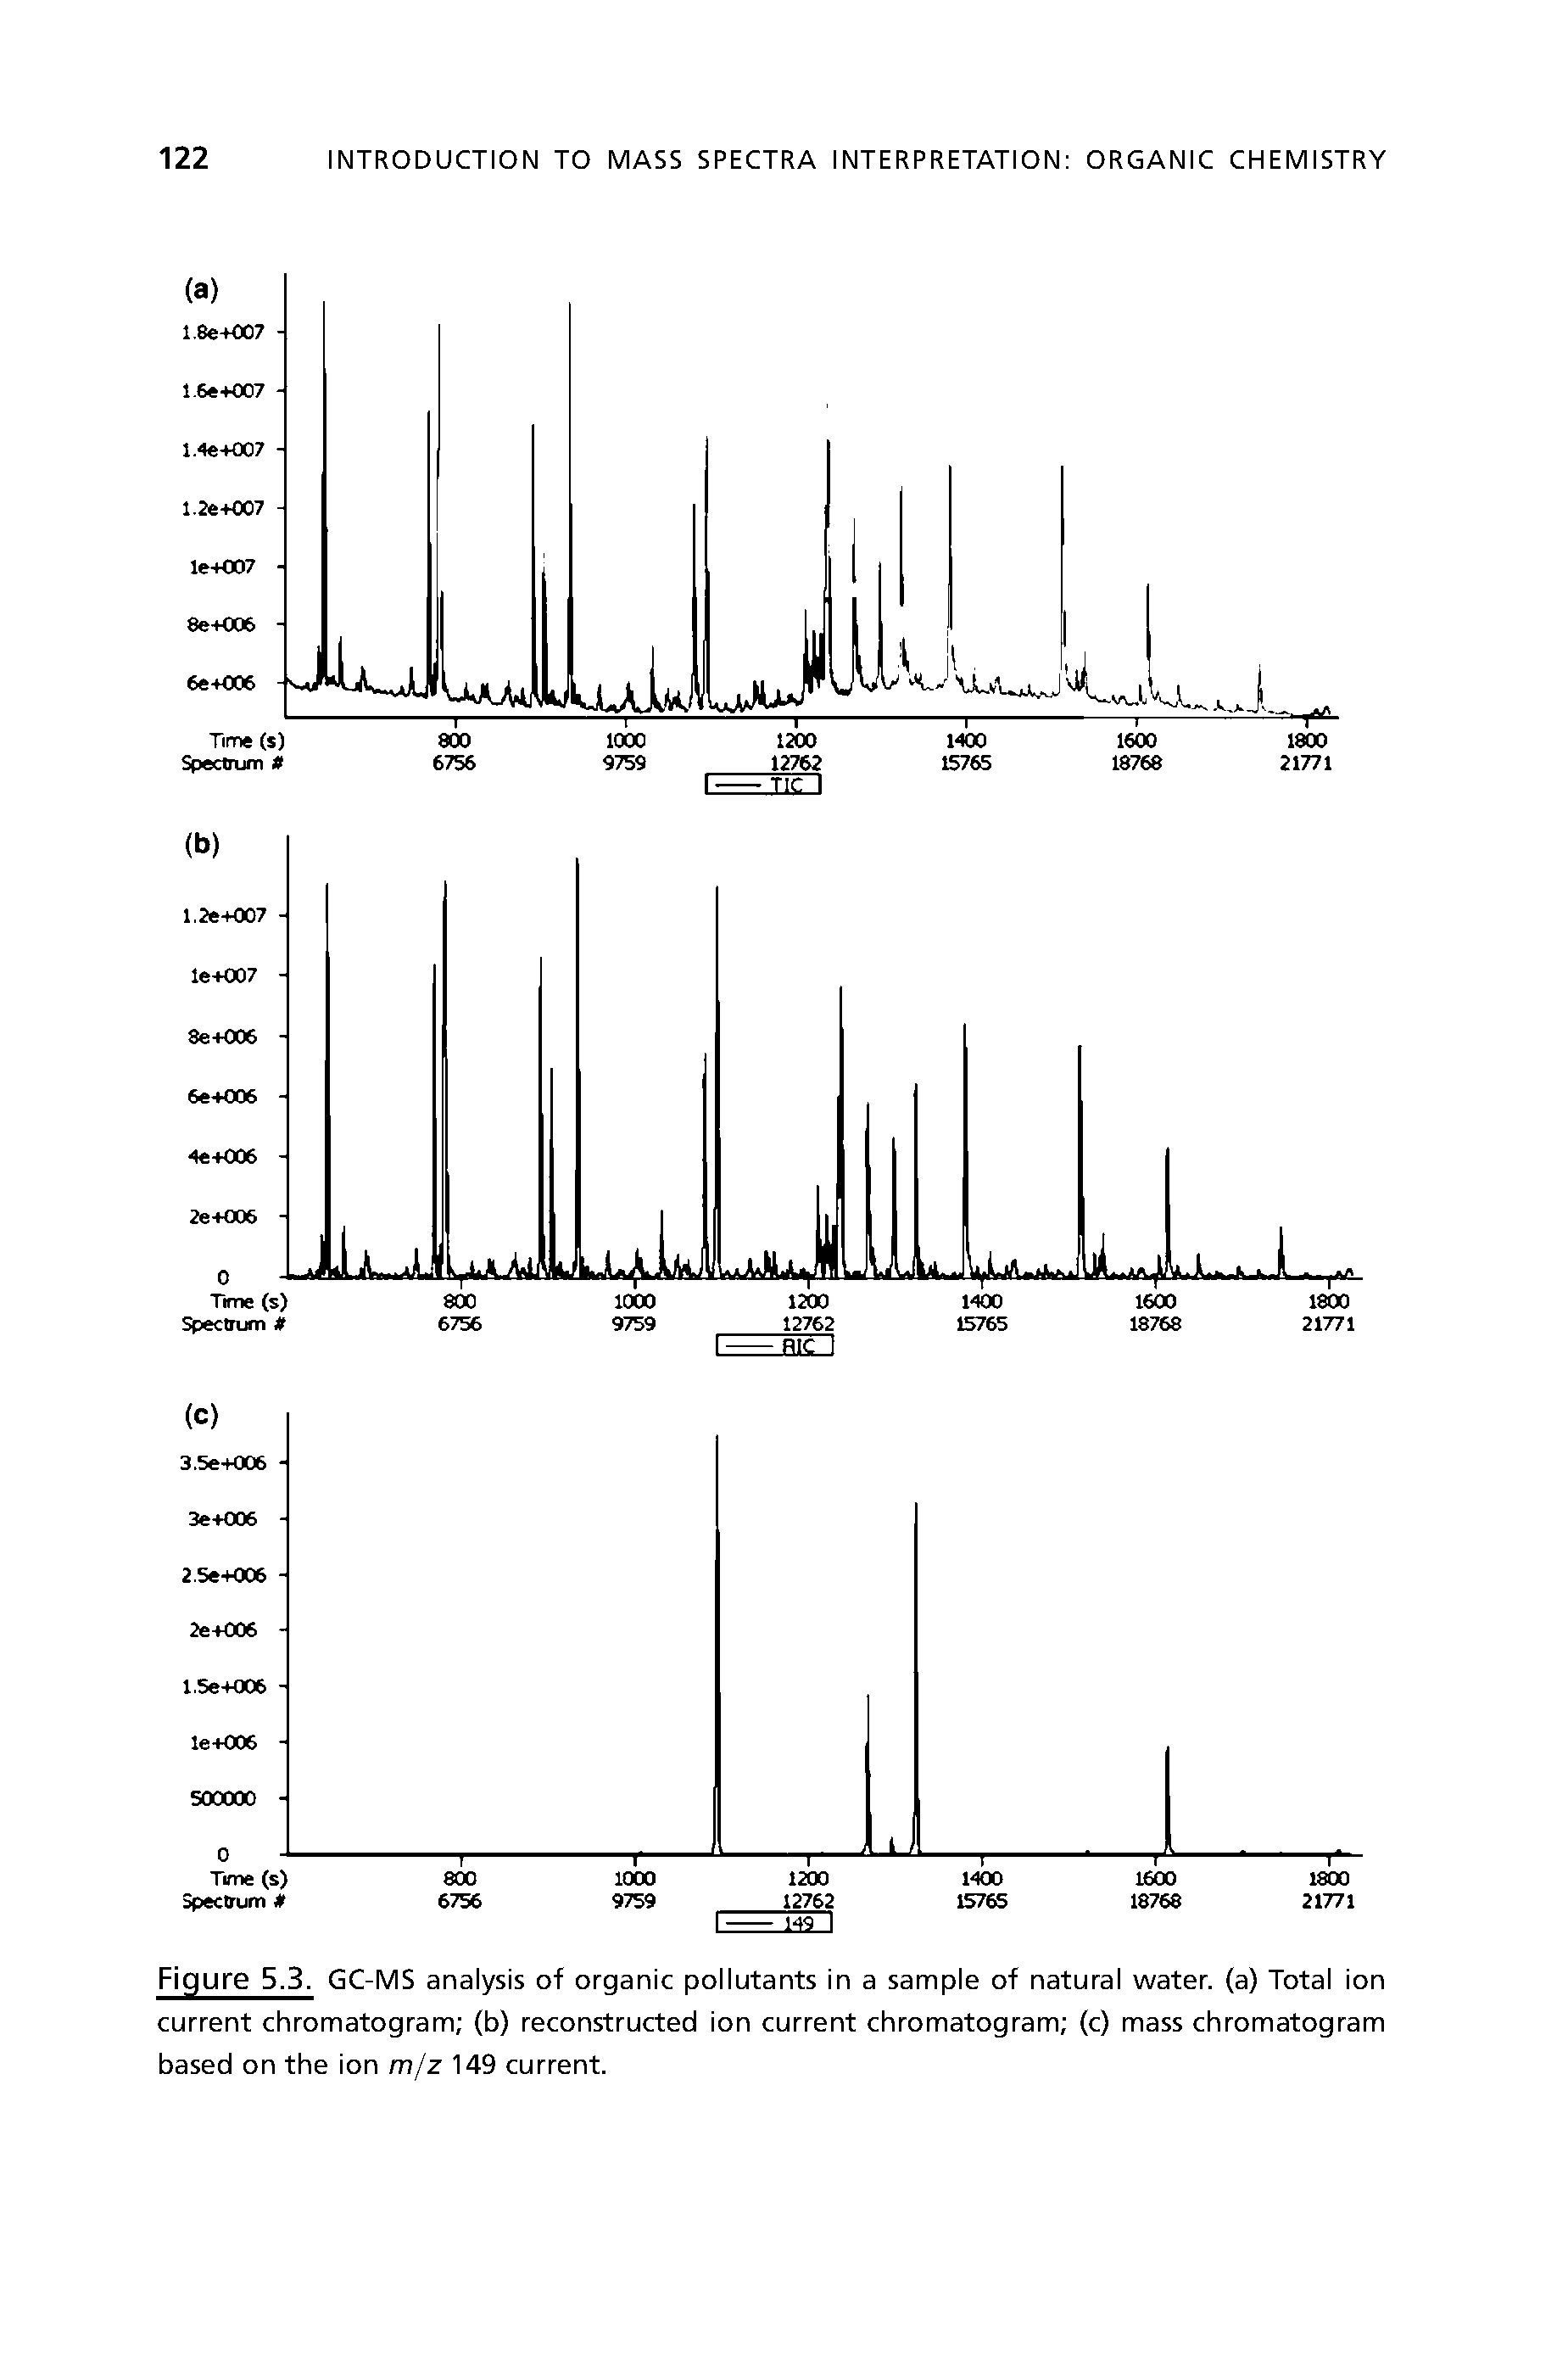 Figure 5.3. GC-MS analysis of organic pollutants in a sample of natural water, (a) Total ion current chromatogram (b) reconstructed ion current chromatogram (c) mass chromatogram based on the ion m/z 149 current.